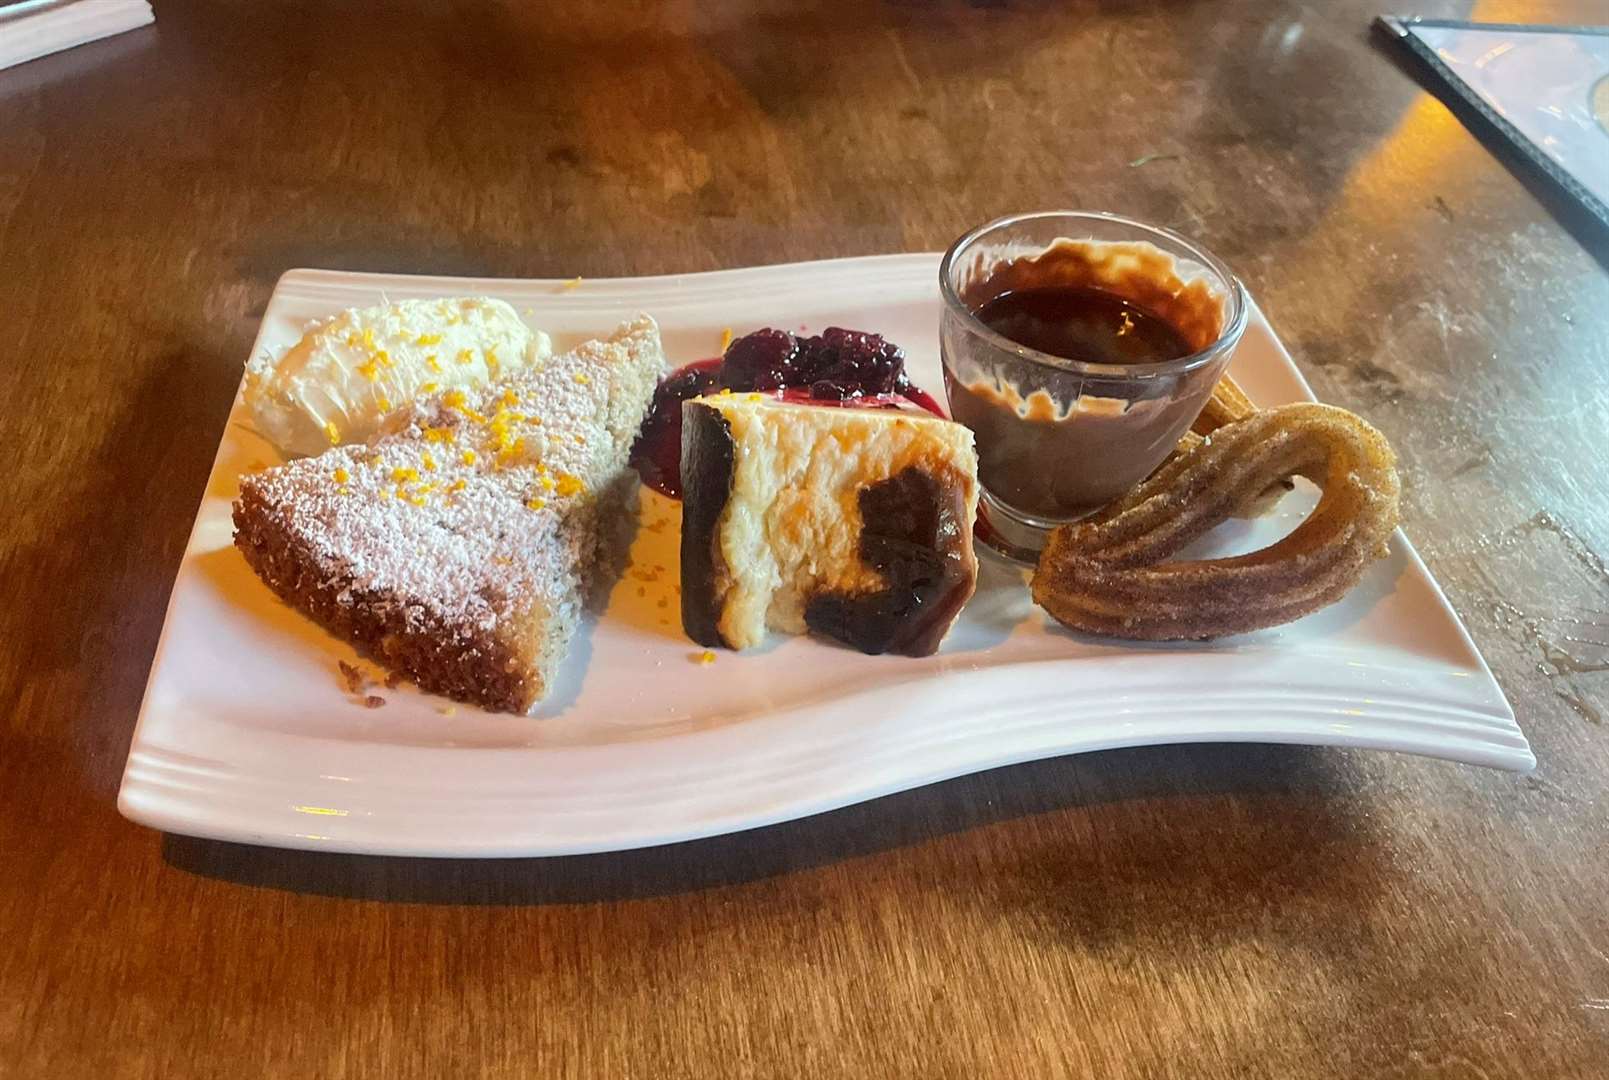 Three deserts on one plate... yes please